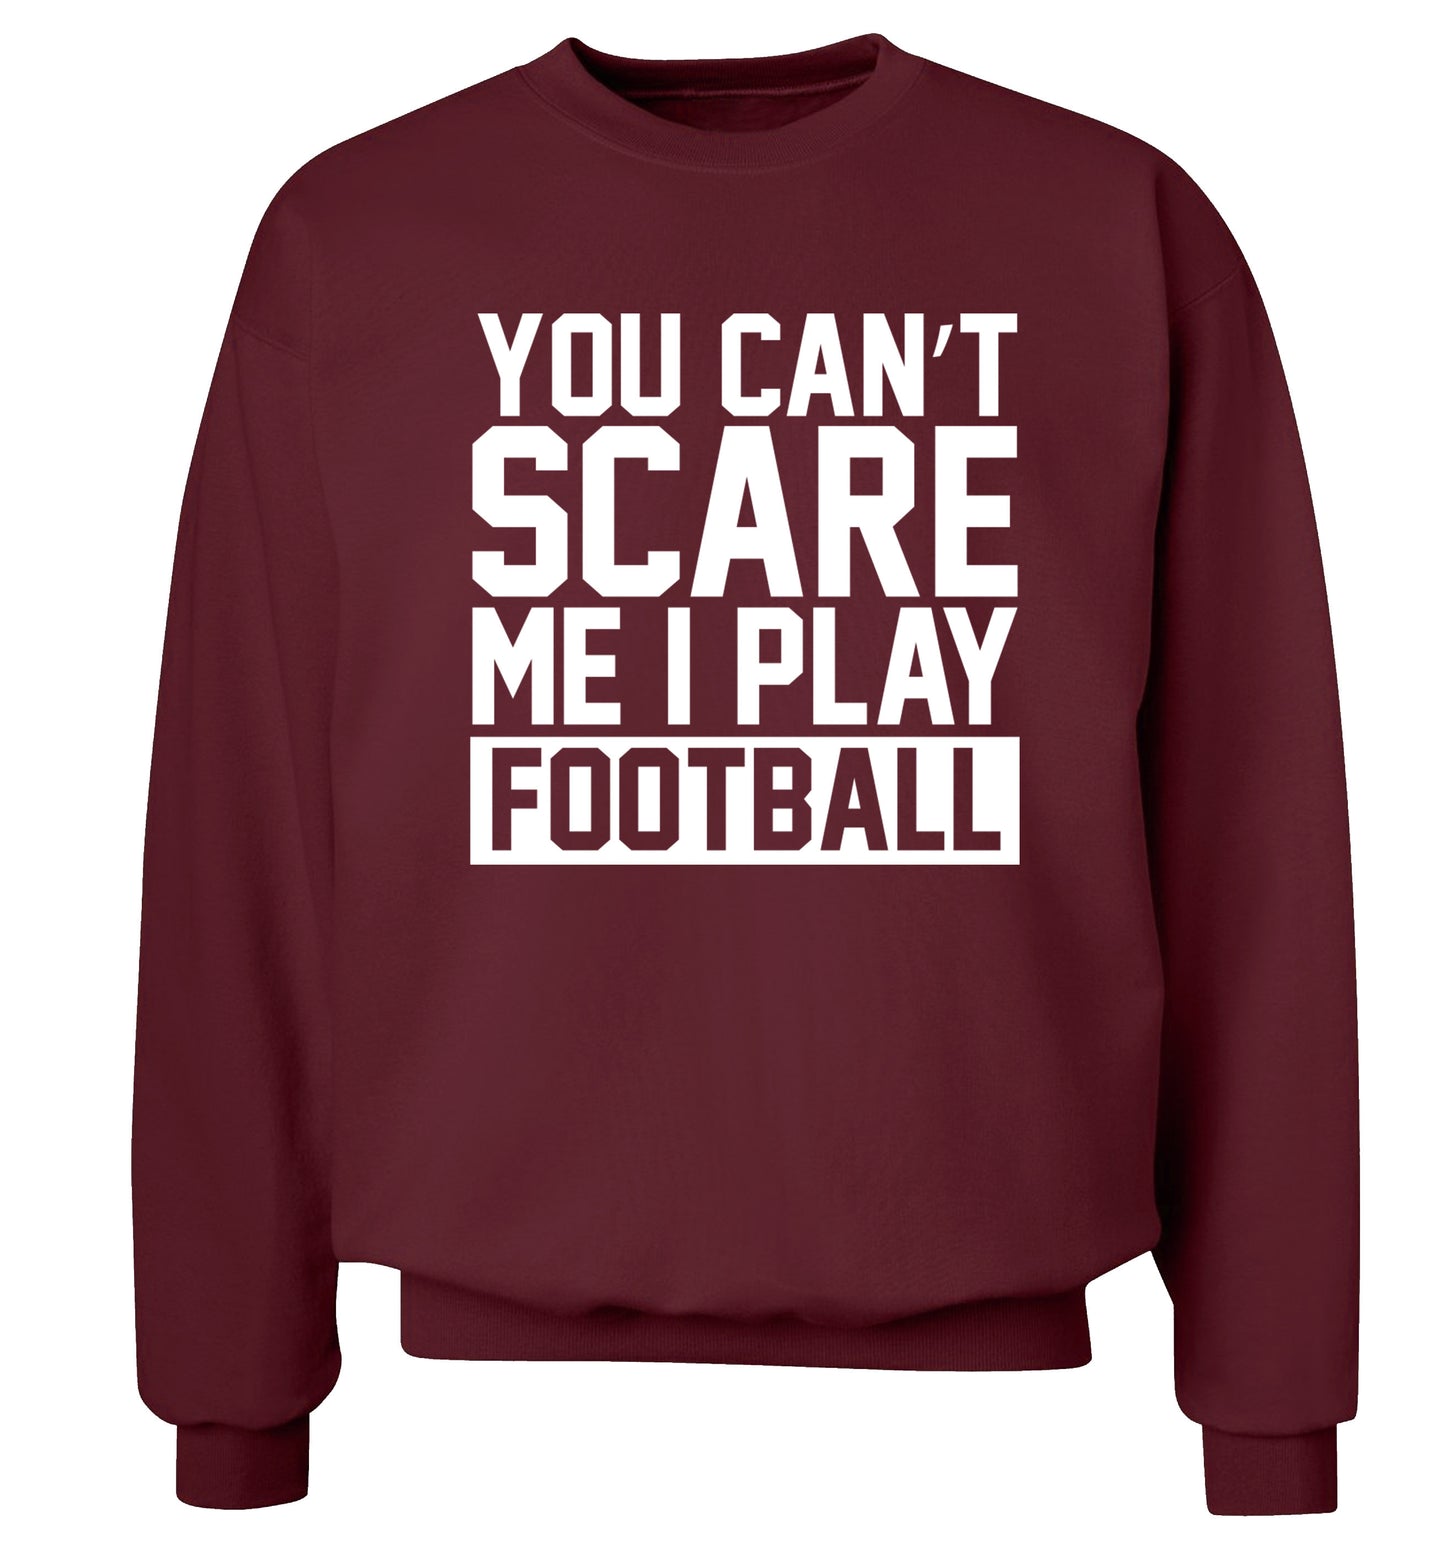 You can't scare me I play football Adult's unisex maroon Sweater 2XL